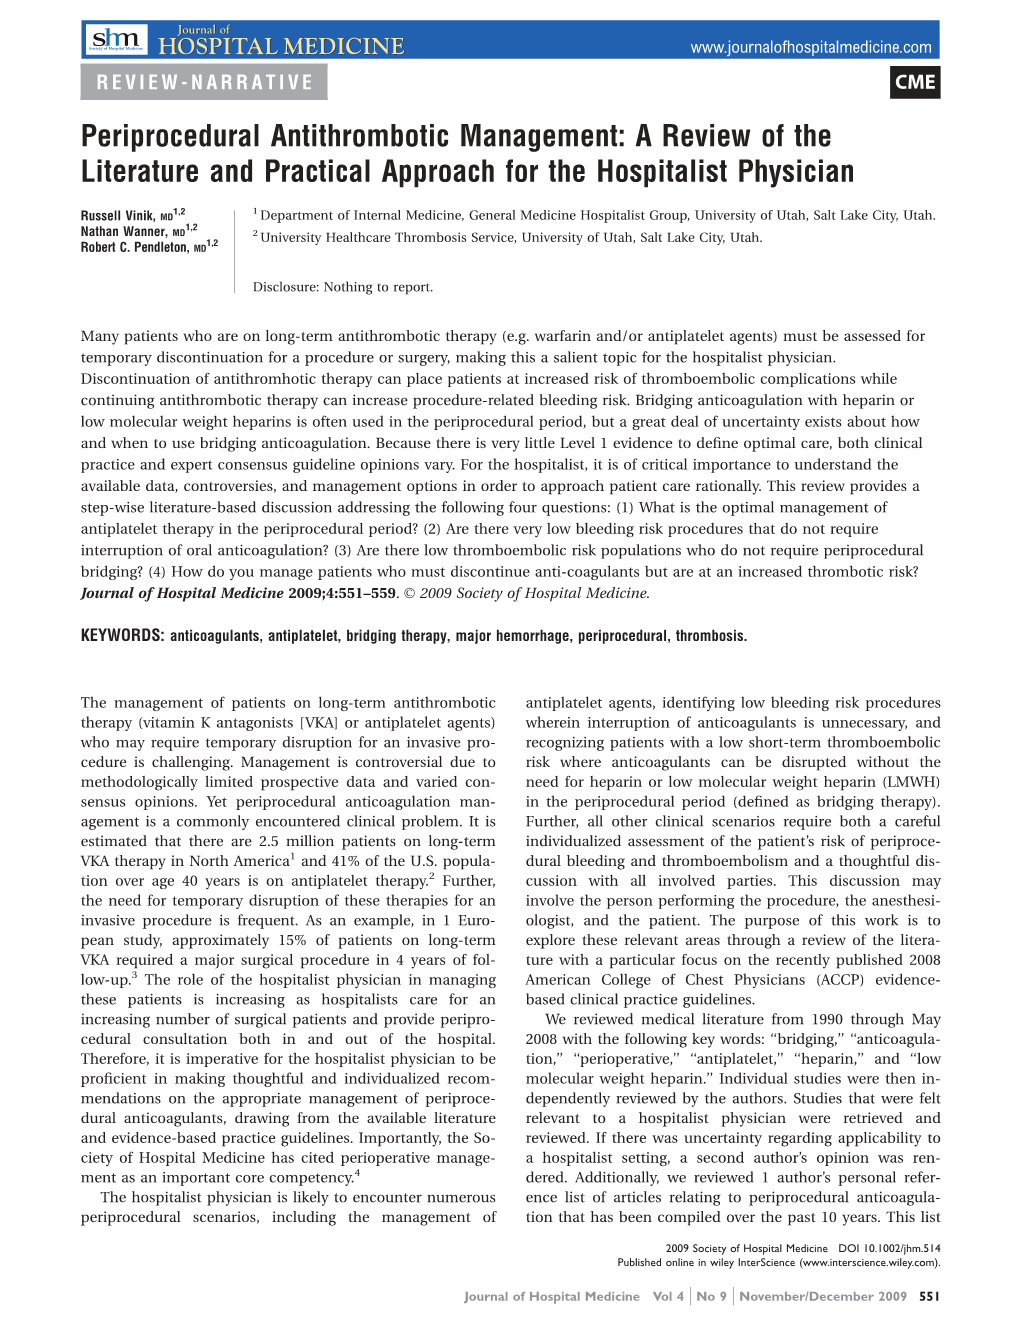 A Review of the Literature and Practical Approach for the Hospitalist Physician